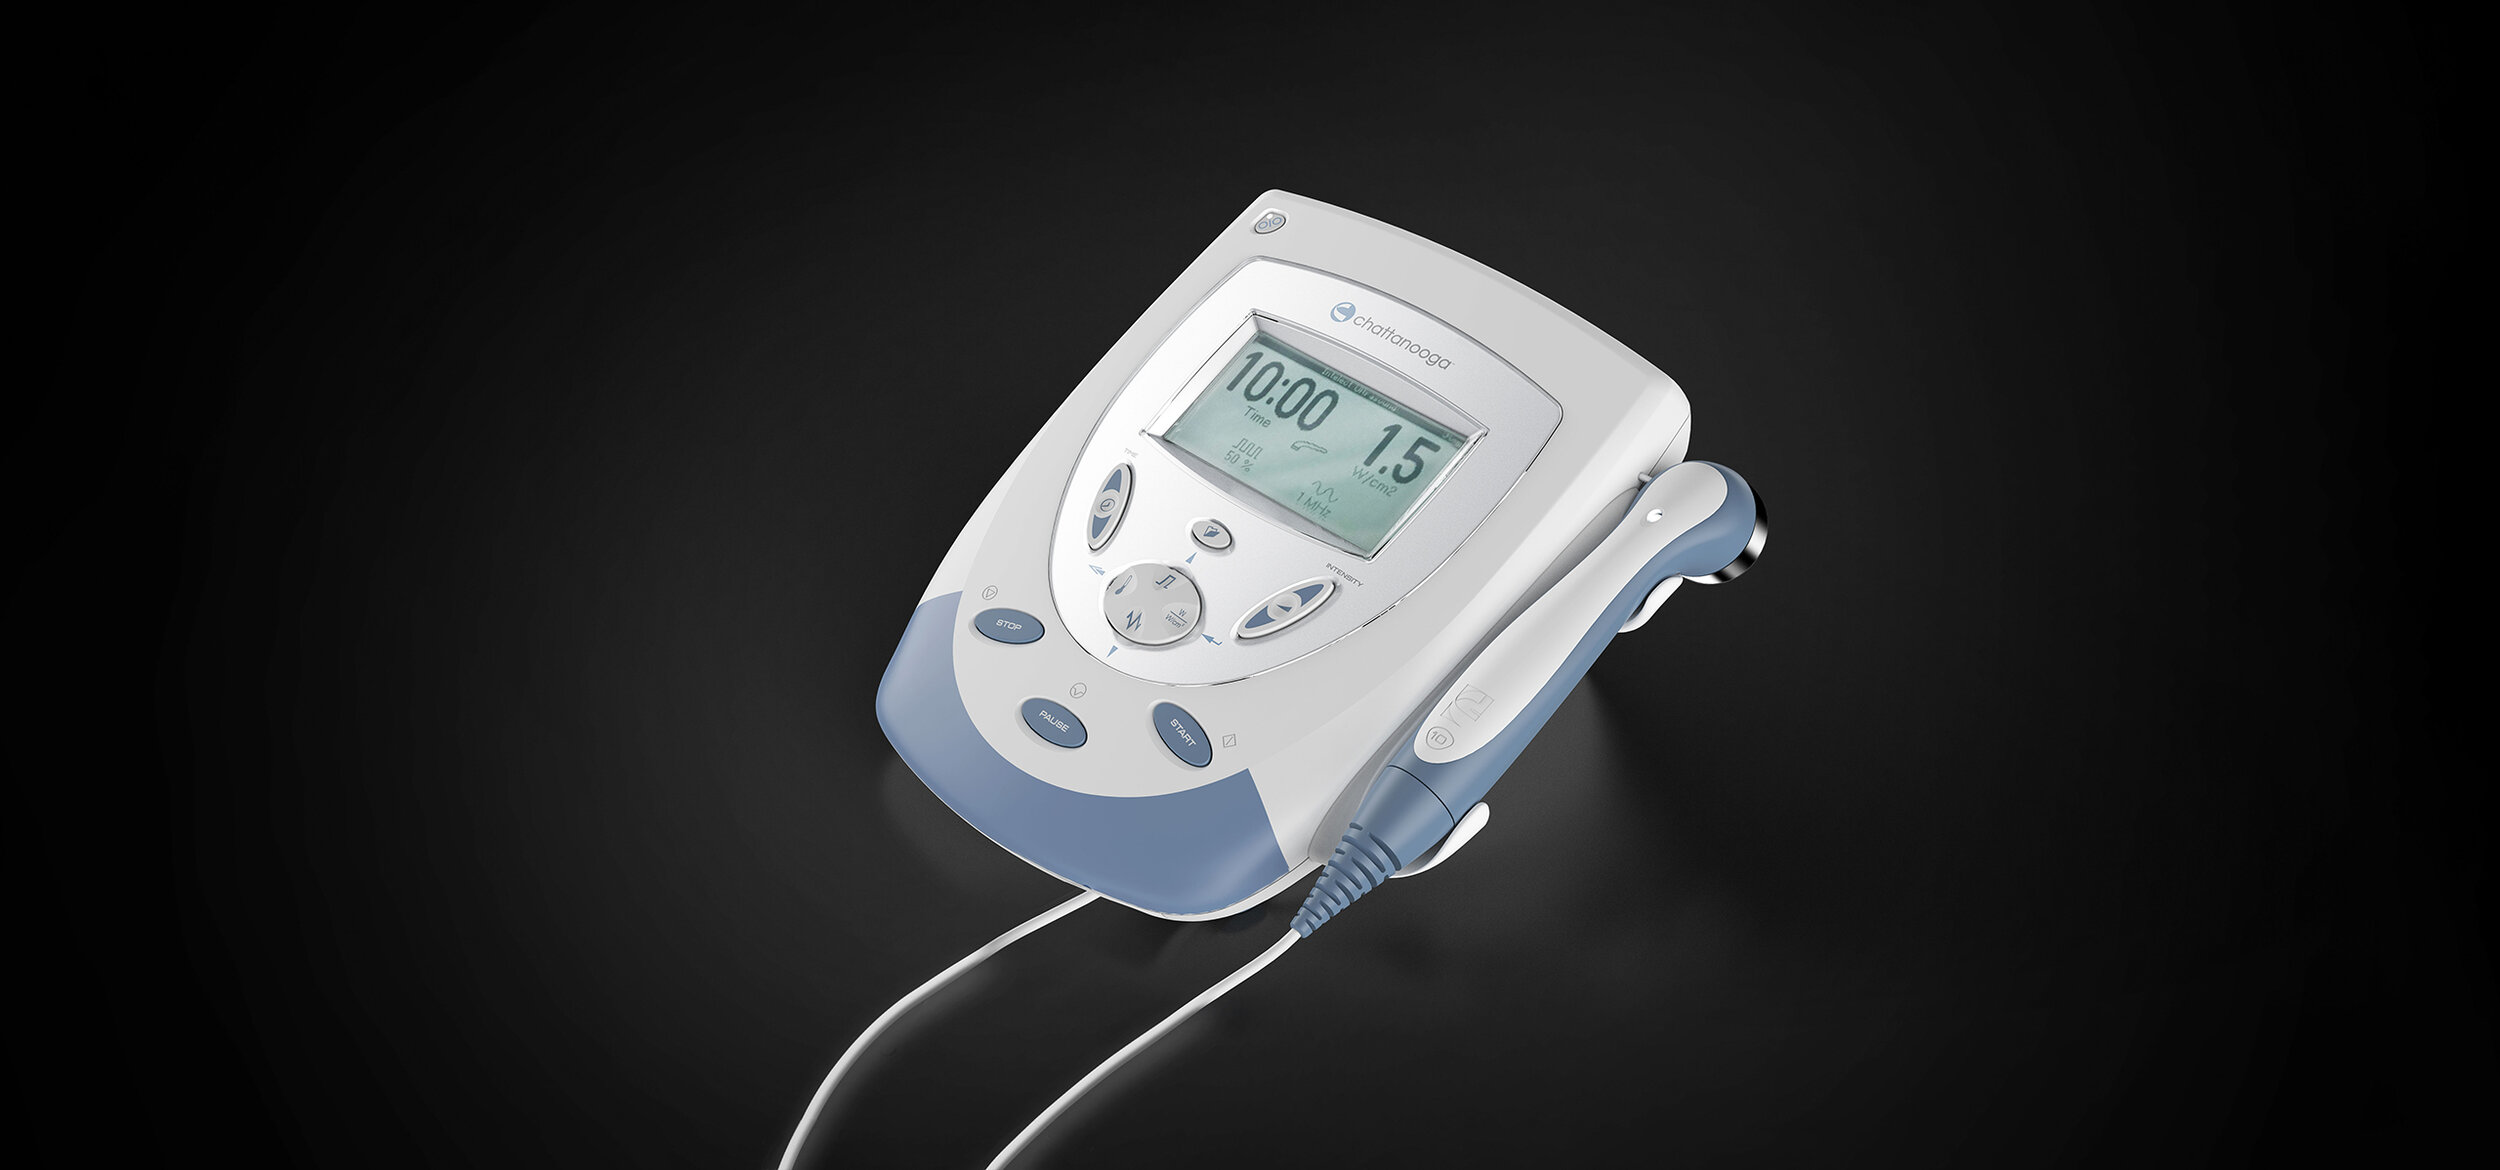 Chattanooga — Intelect Mobile Ultrasound